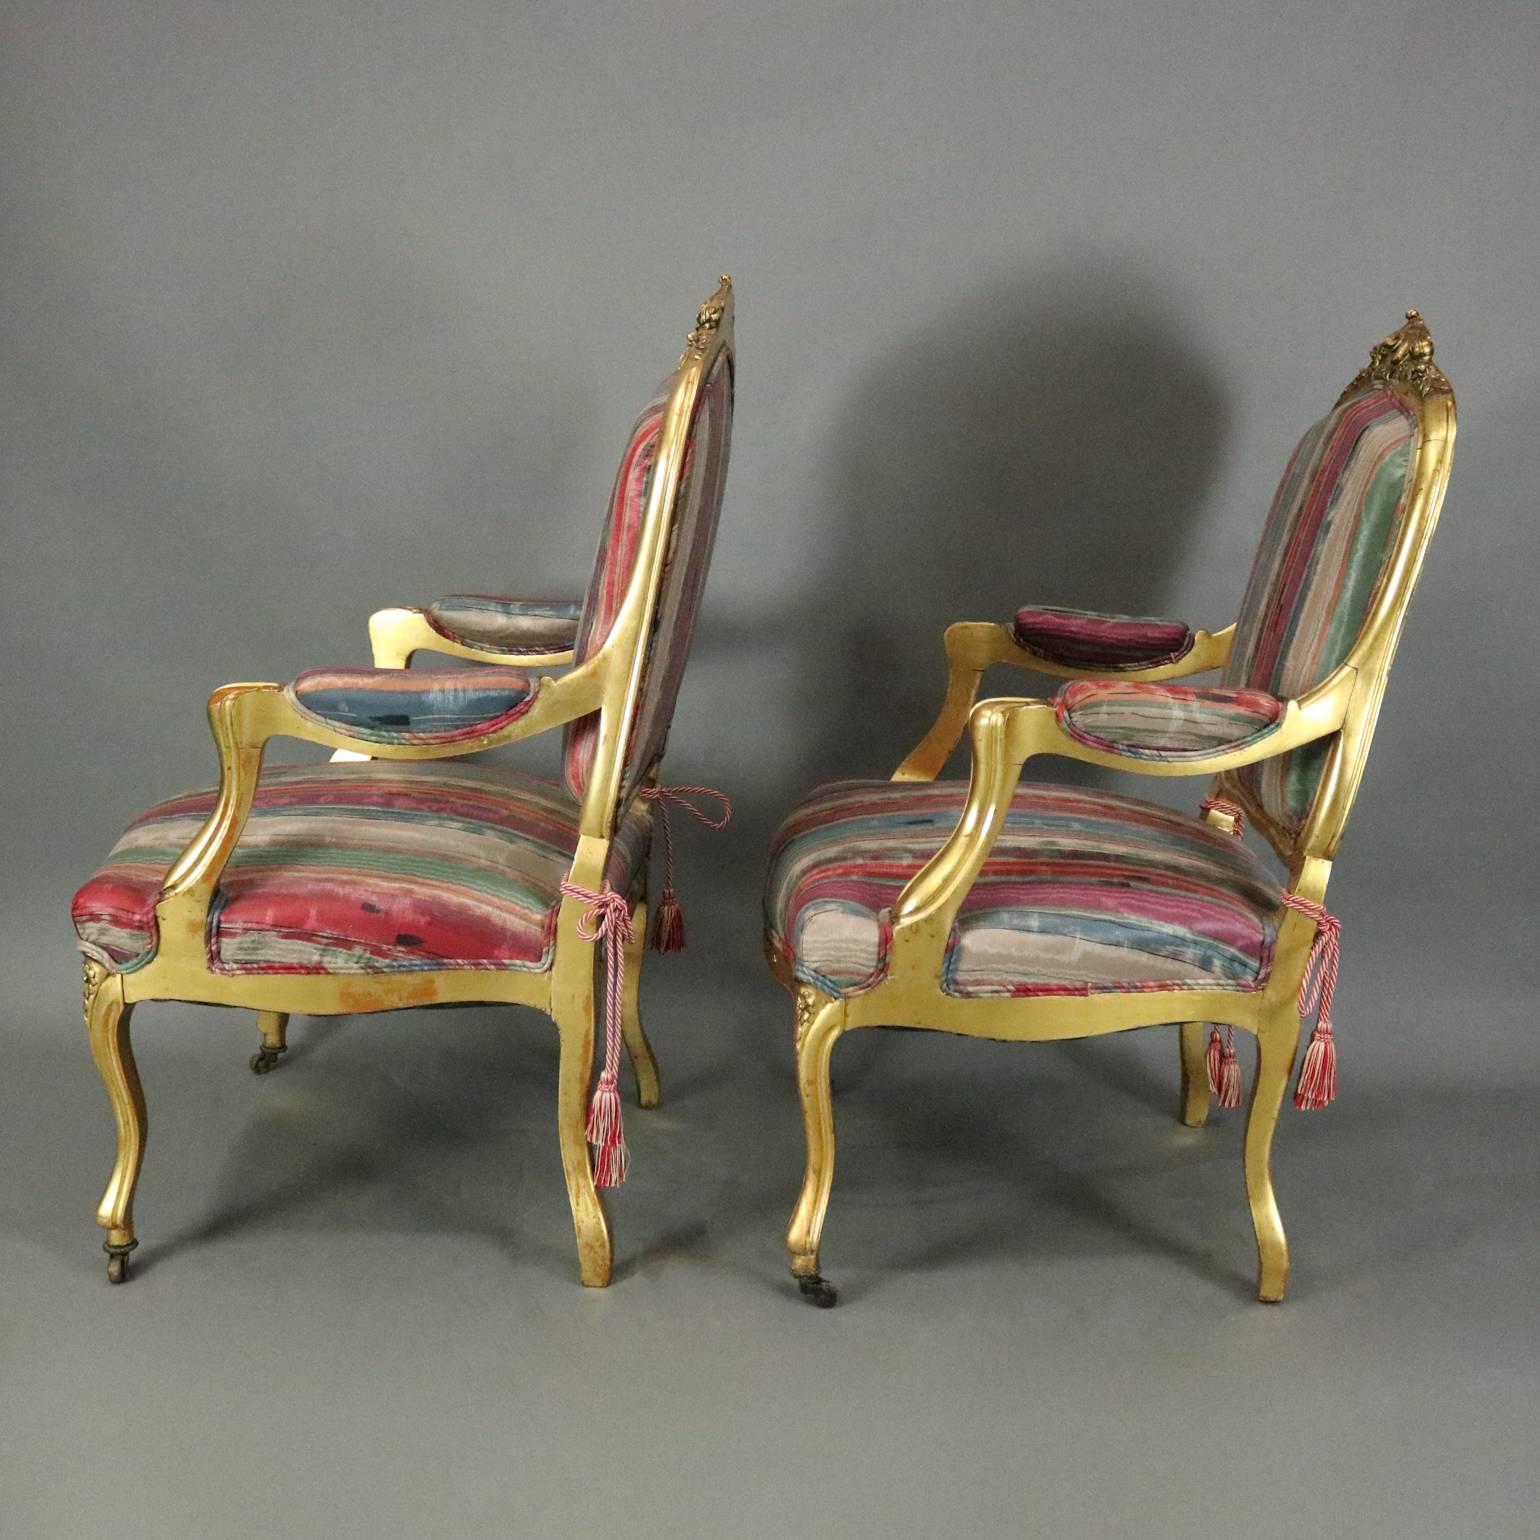 Pair of antique French Louis XIV style upholstered armchairs feature carved giltwood construction with acanthus and foliate decoration, circa 1870

Matching settee and side chairs listed separately

Measures: 40